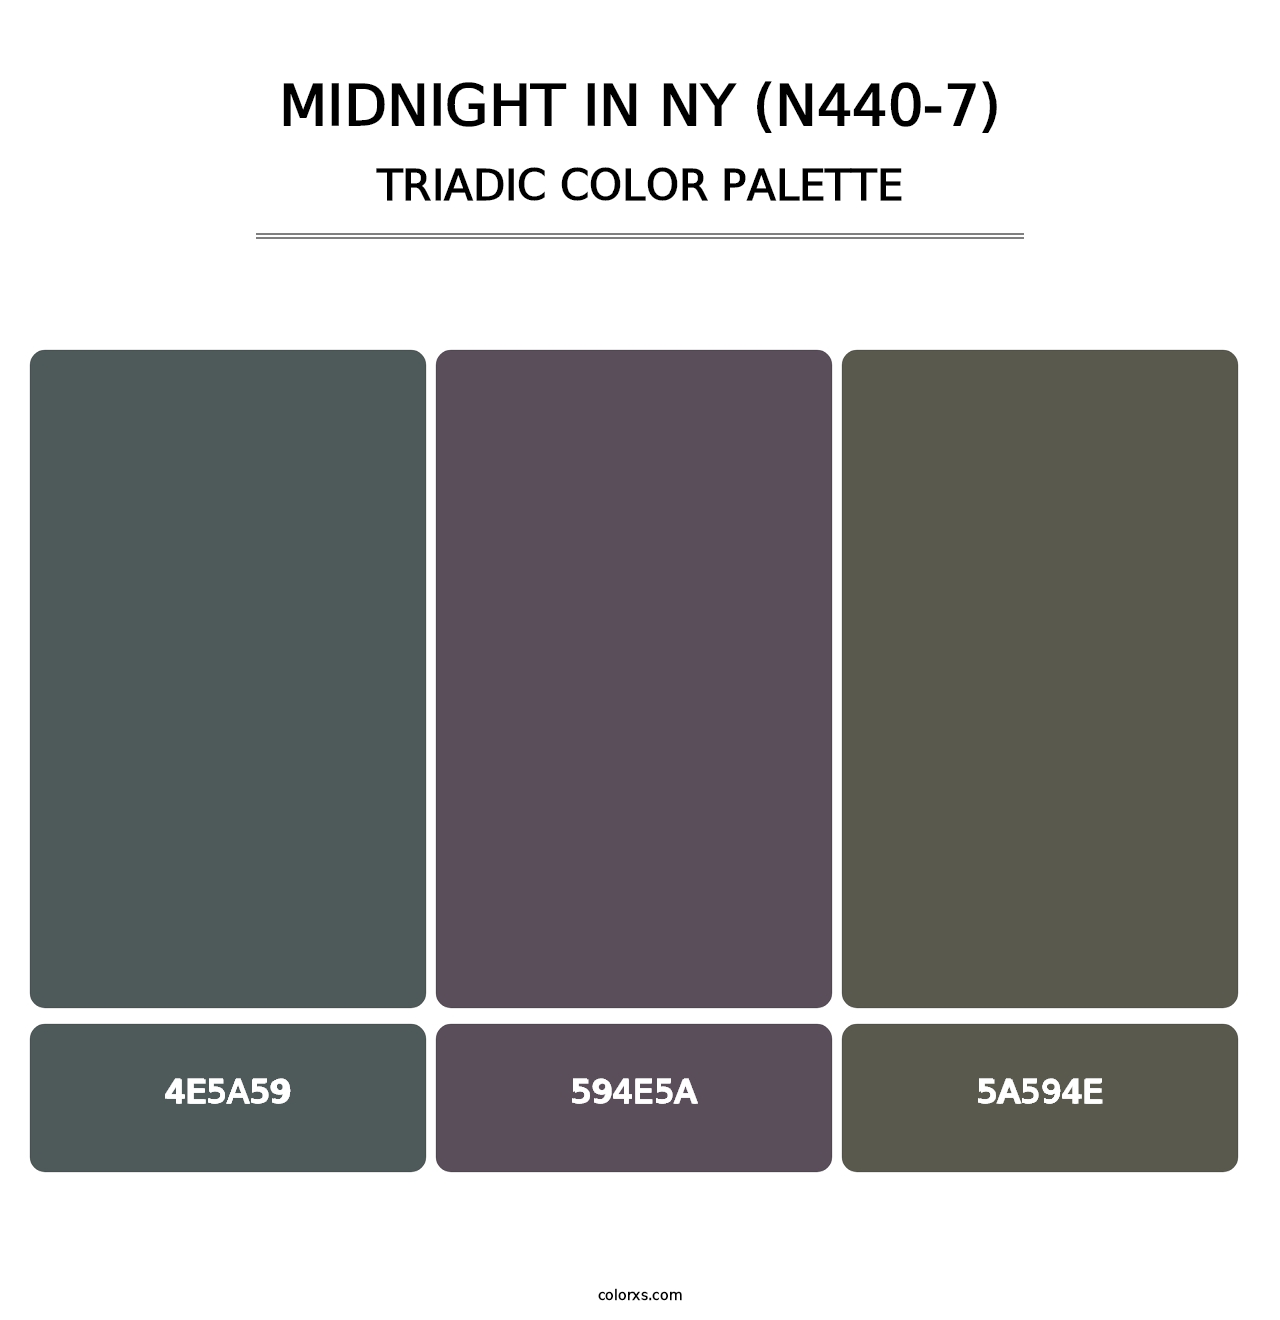 Midnight In Ny (N440-7) - Triadic Color Palette